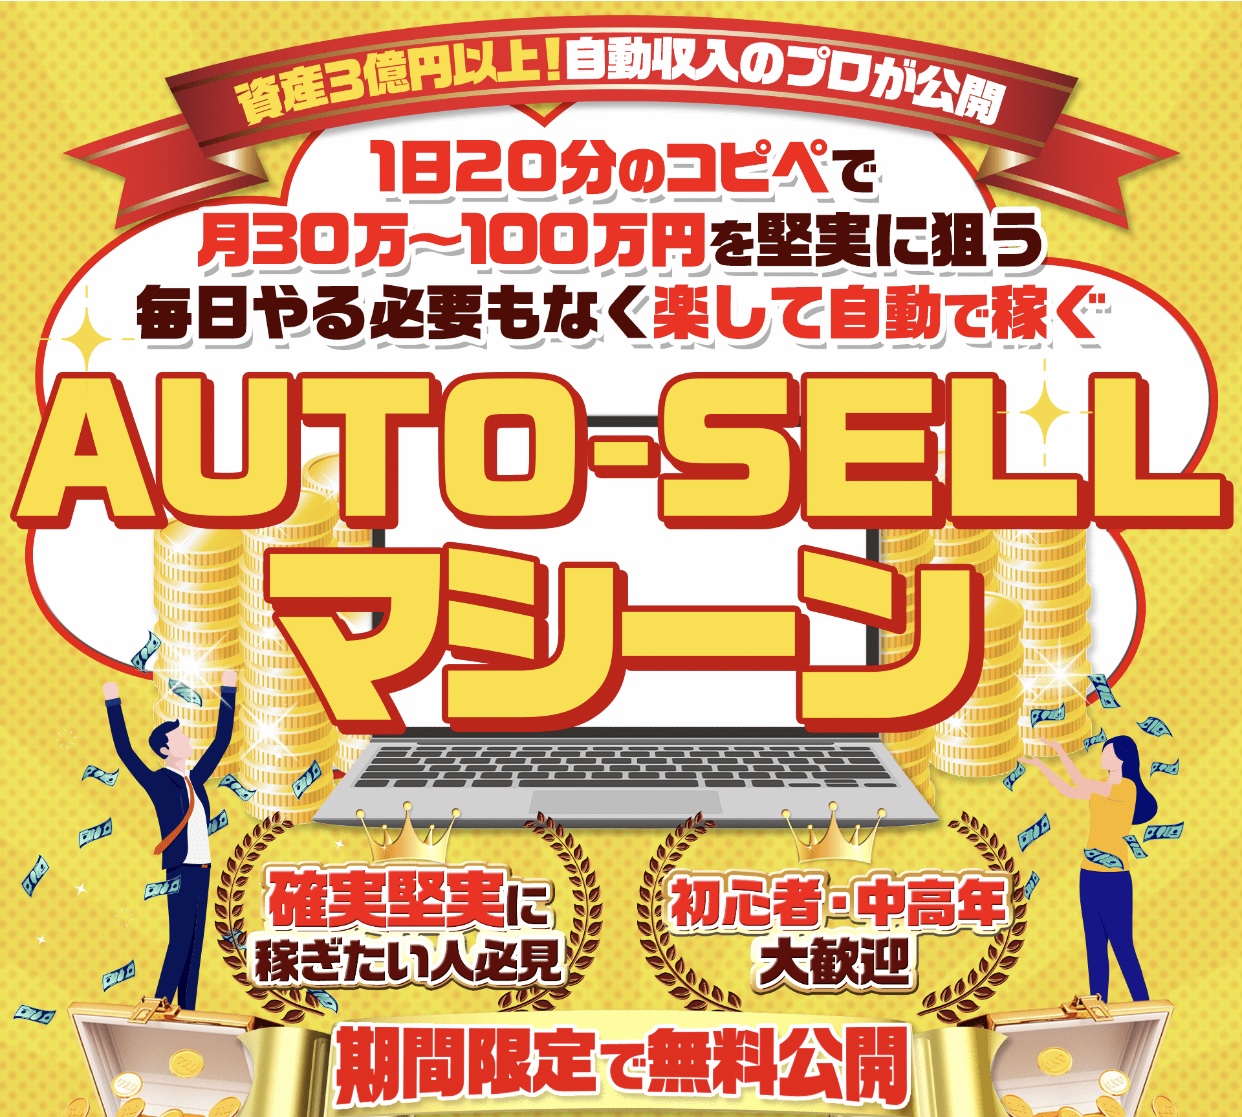 AUTO-SELLマシーン